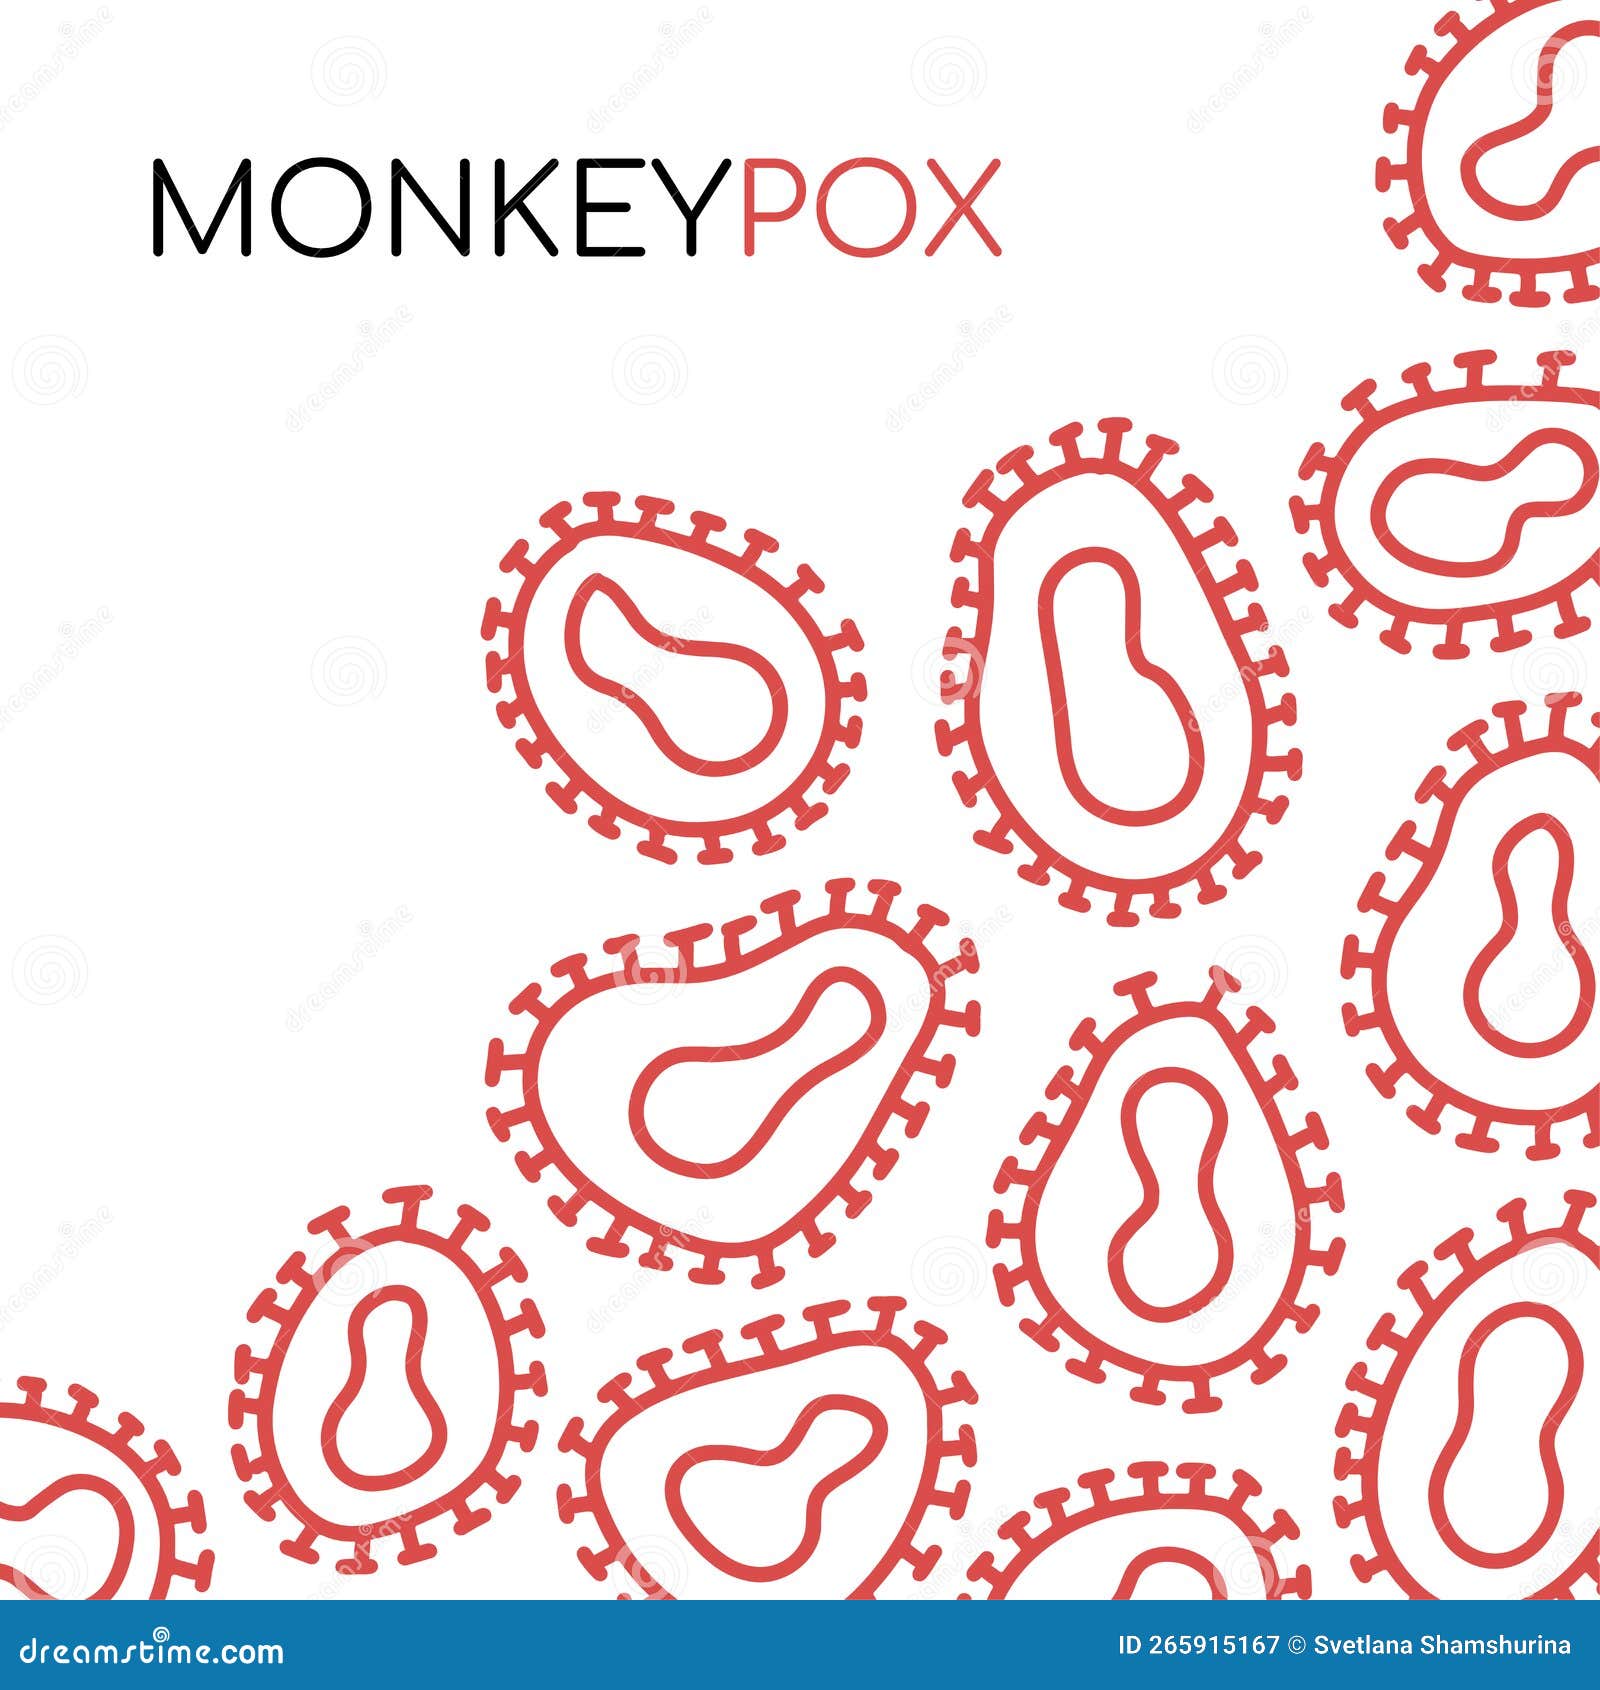 monkeypox virus banner. monkeypox outbreak pandemic  with microscopic cells view background. linear abstract